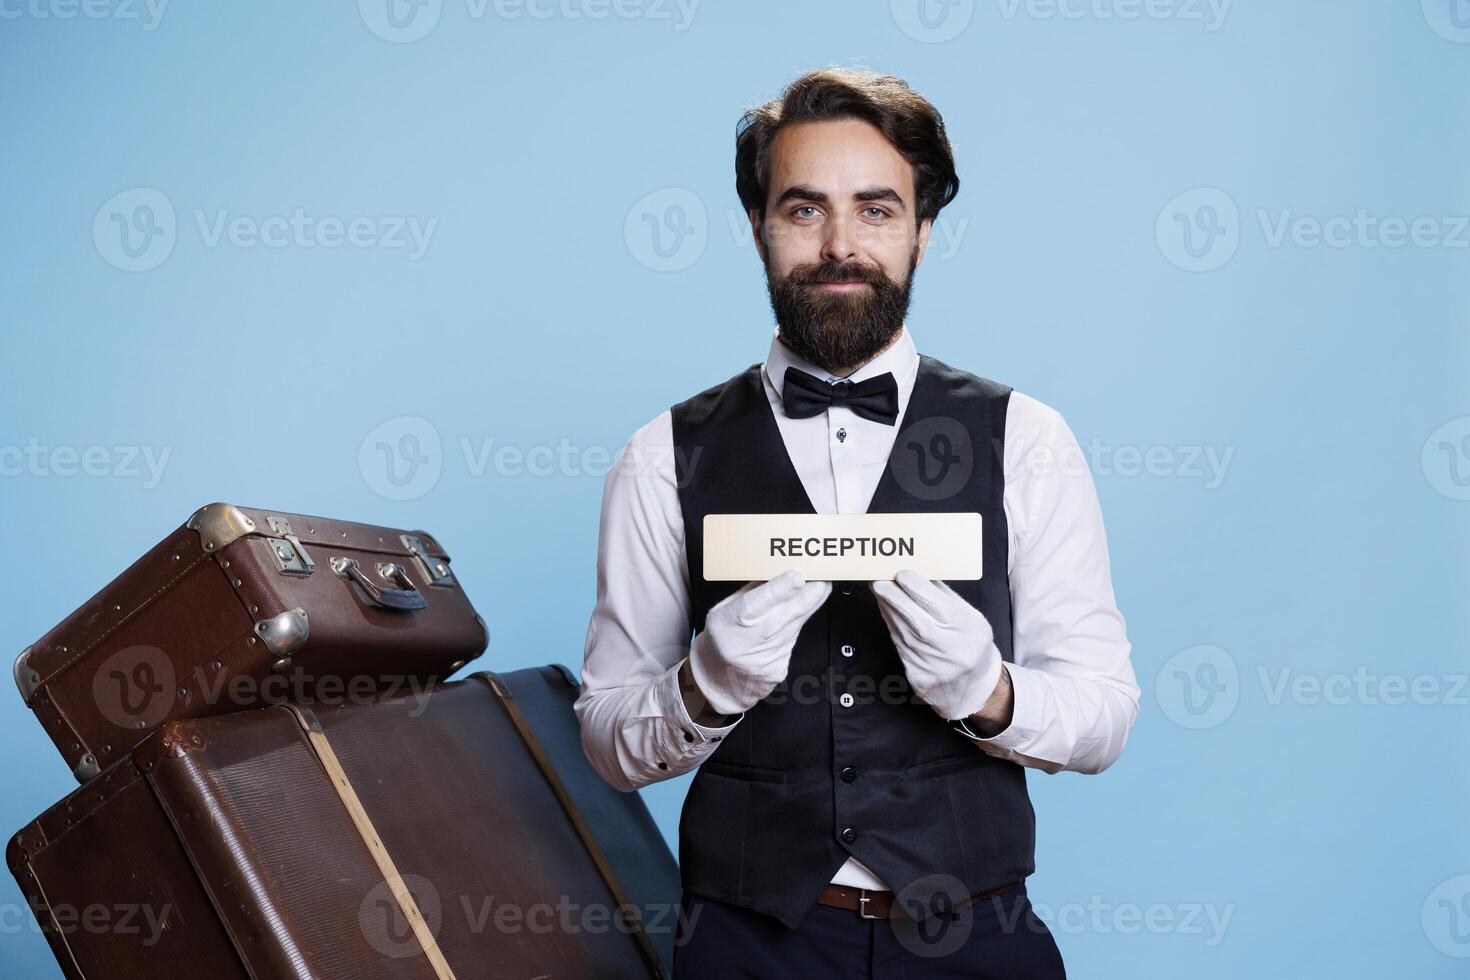 Porter guides tourists in the right path by showcasing reception symbol on camera. Skilled hotel doorman in the travel industry, pointing at registration desk against blue background. photo